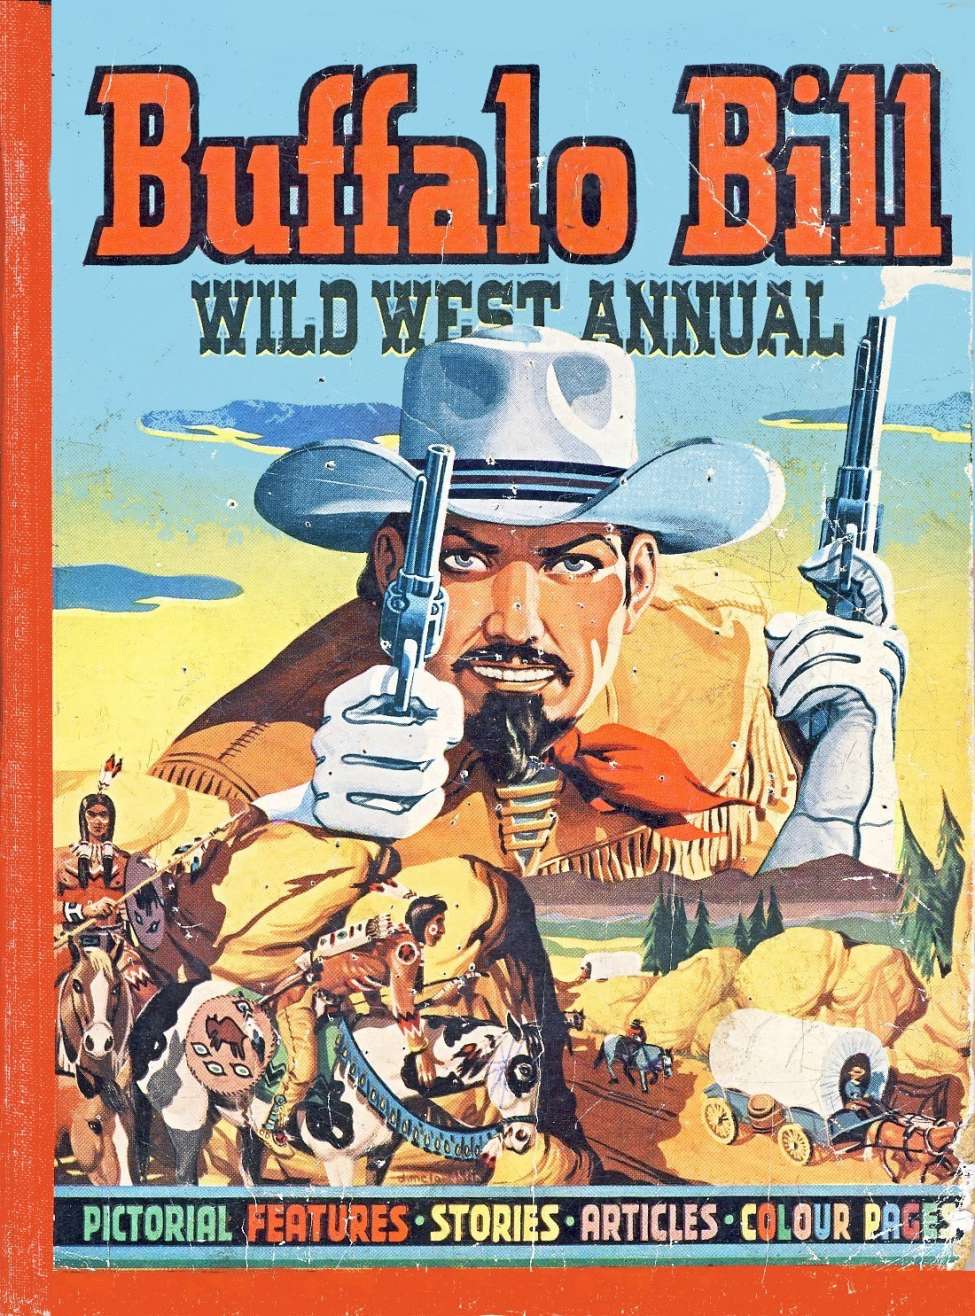 Book Cover For Buffalo Bill Wild West Annual 1951